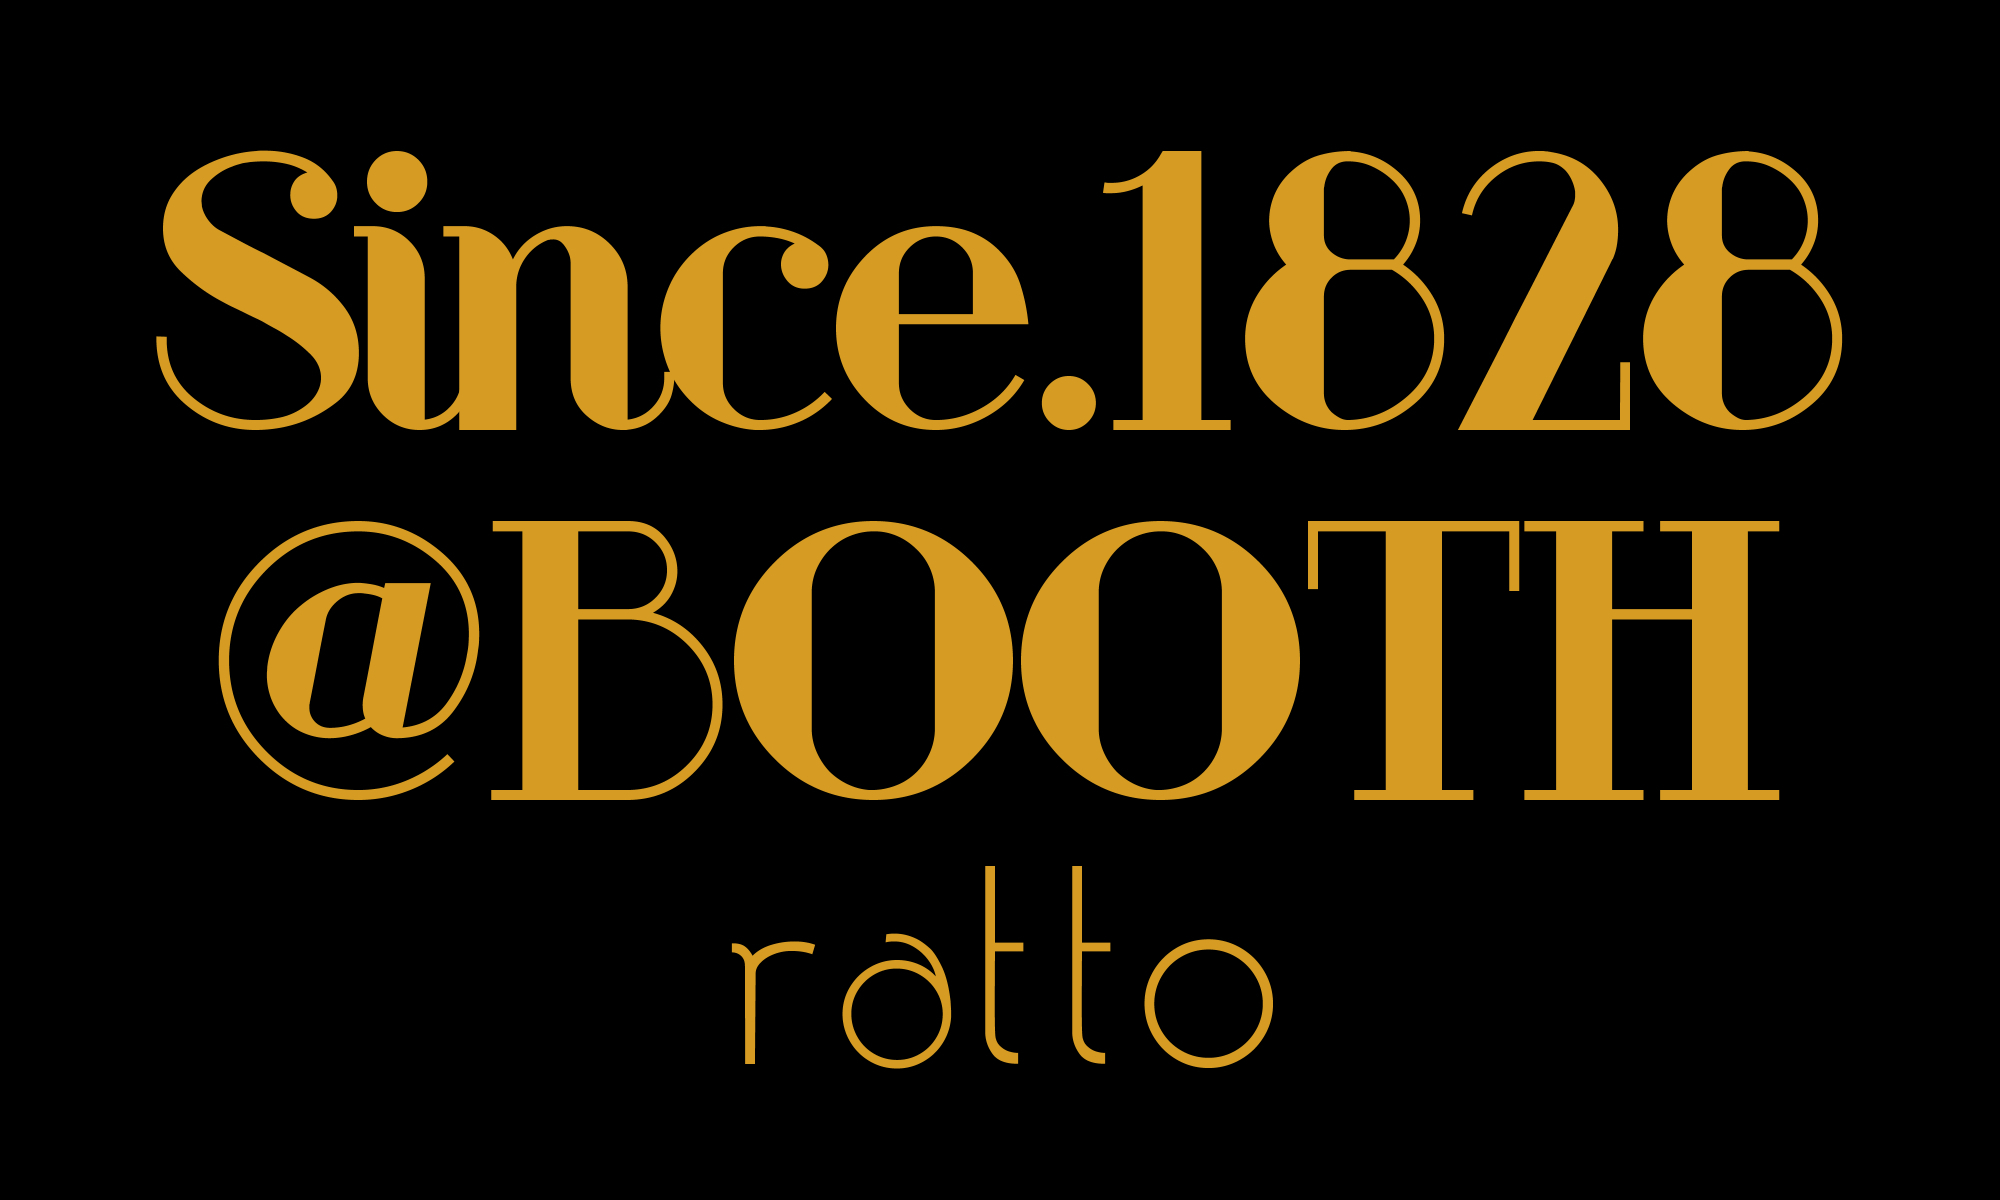 Since.1828@BOOTH